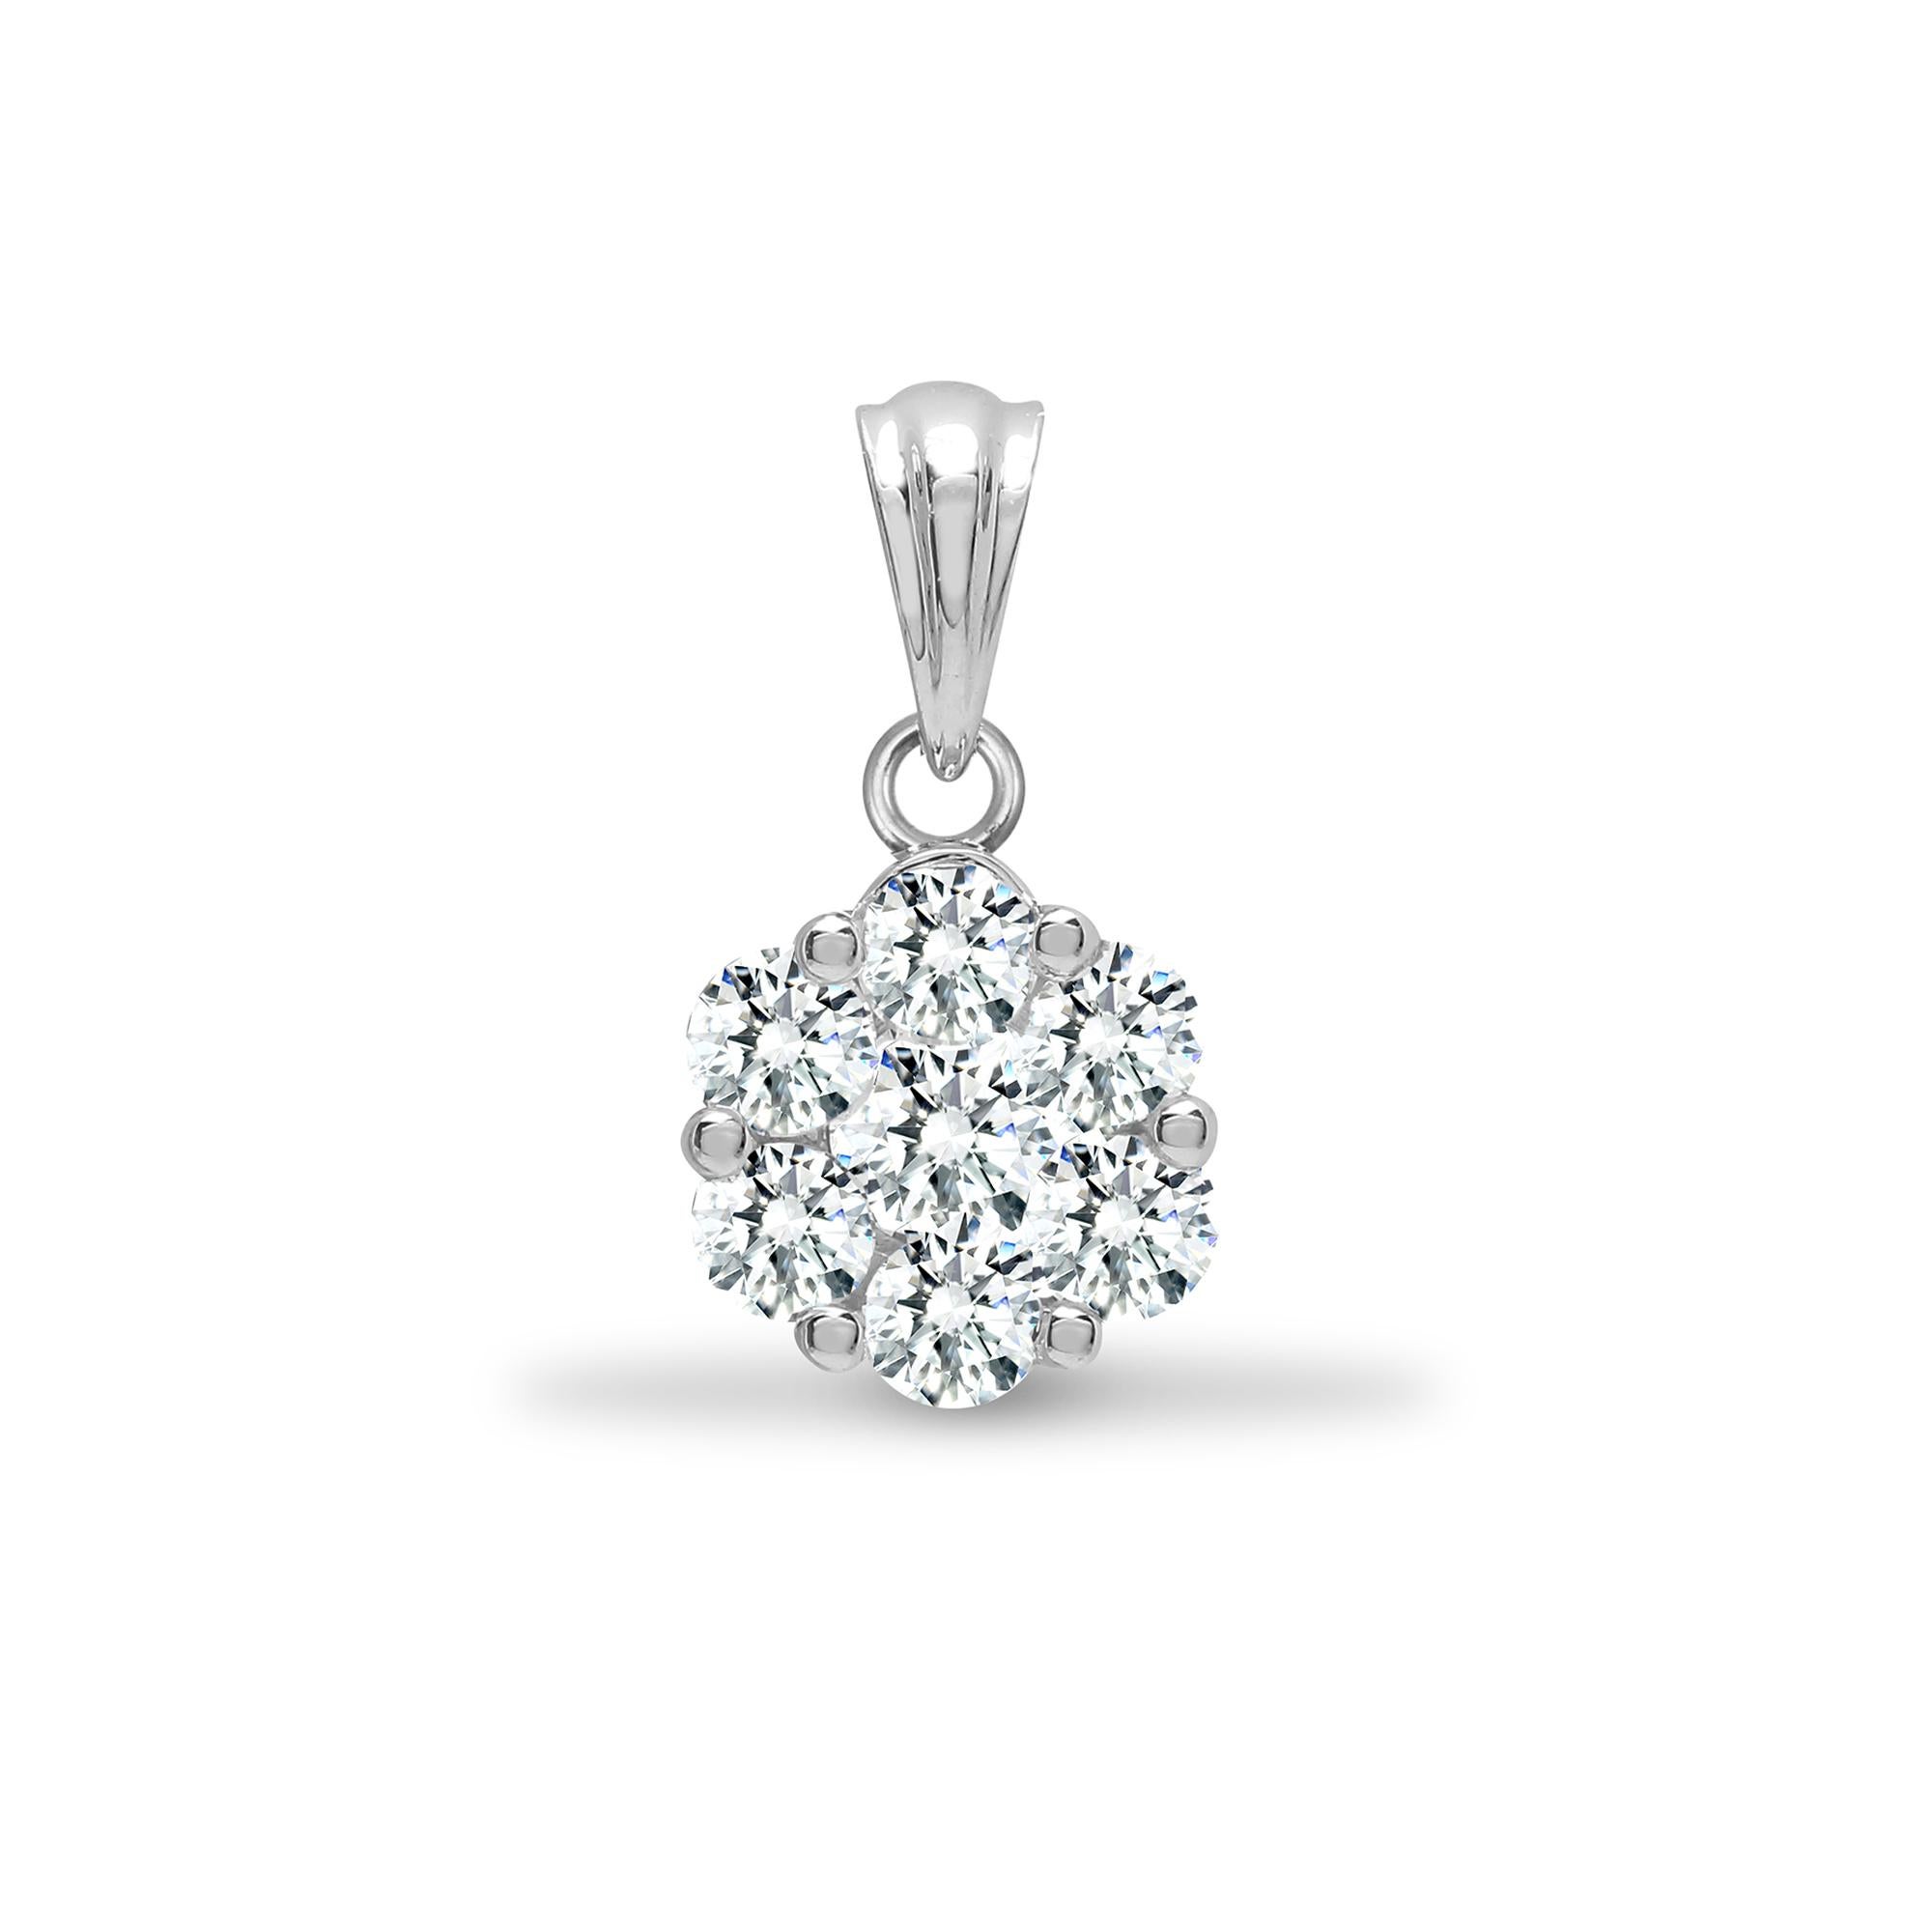 This Beautiful 0.75 Carat Flower design Cluster Diamond pendant features 7 round brilliant cut natural diamonds Color G - H Clarity VS - SI1 Round White Diamonds. Comes with a stunning white gold necklace chain all set in 18 Karat white gold,